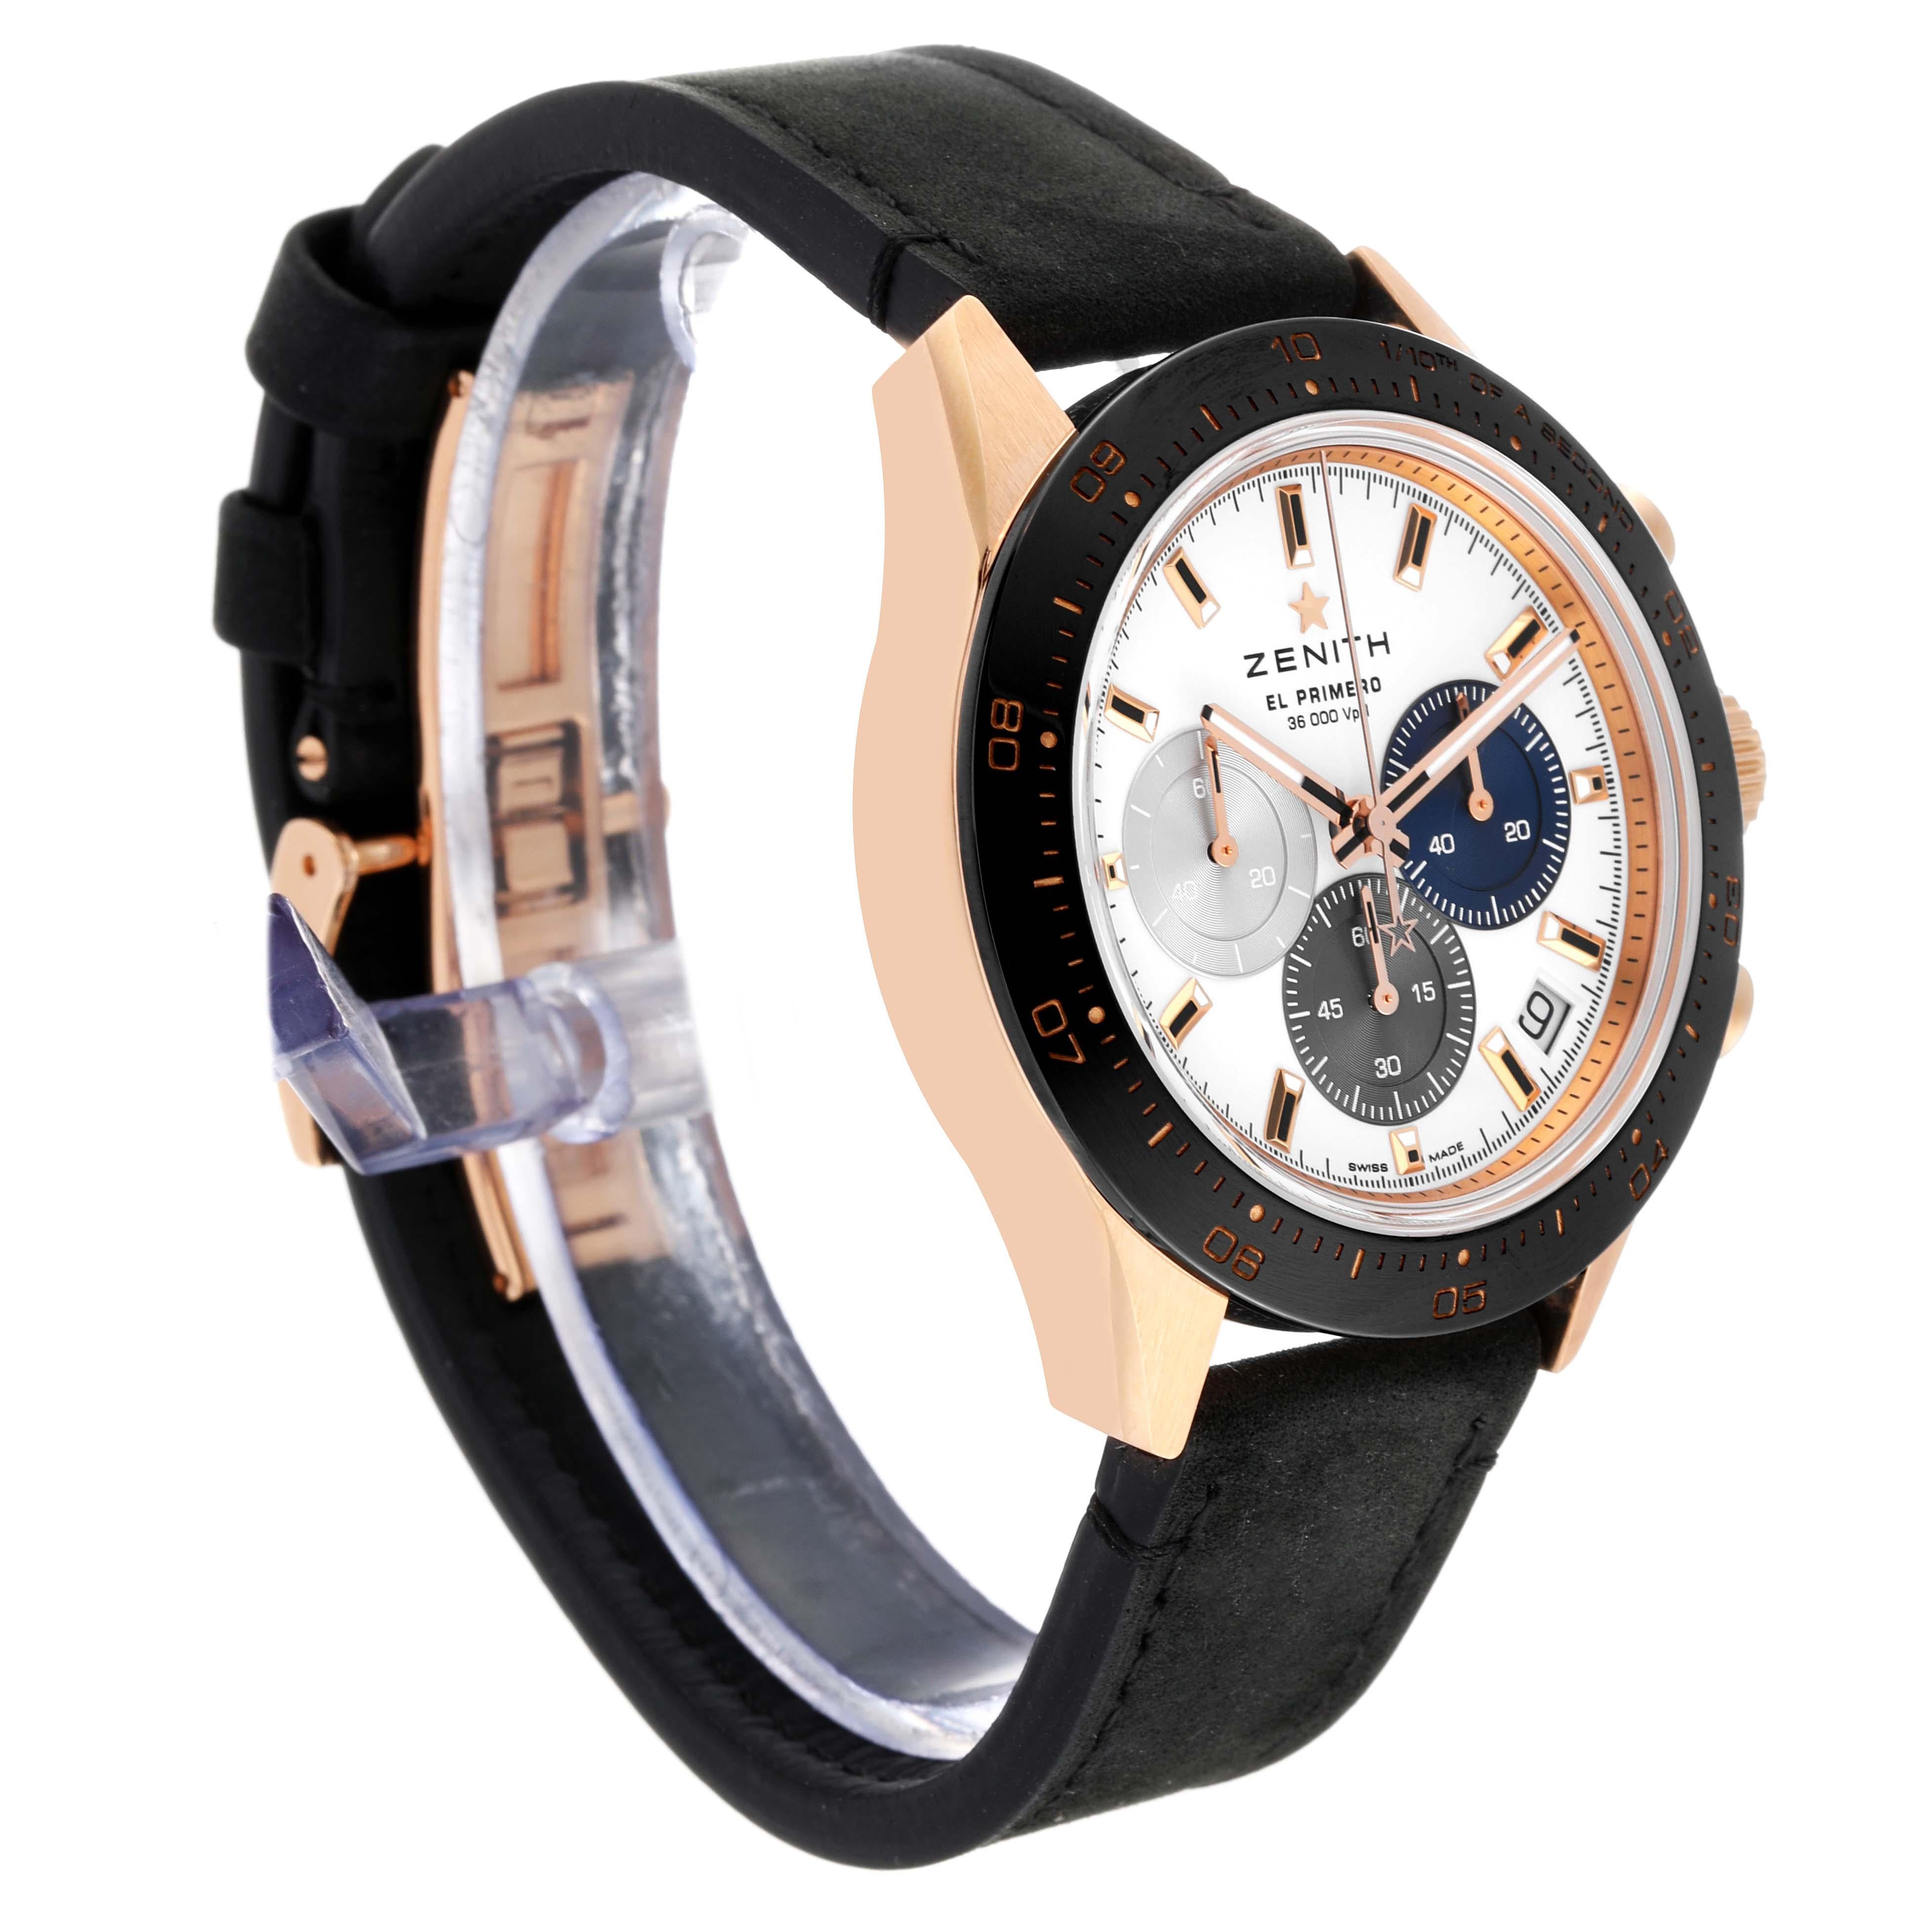 Zenith Chronomaster Sport Rose Gold Mens Watch 18.3100.3600 Box Card In Excellent Condition For Sale In Atlanta, GA